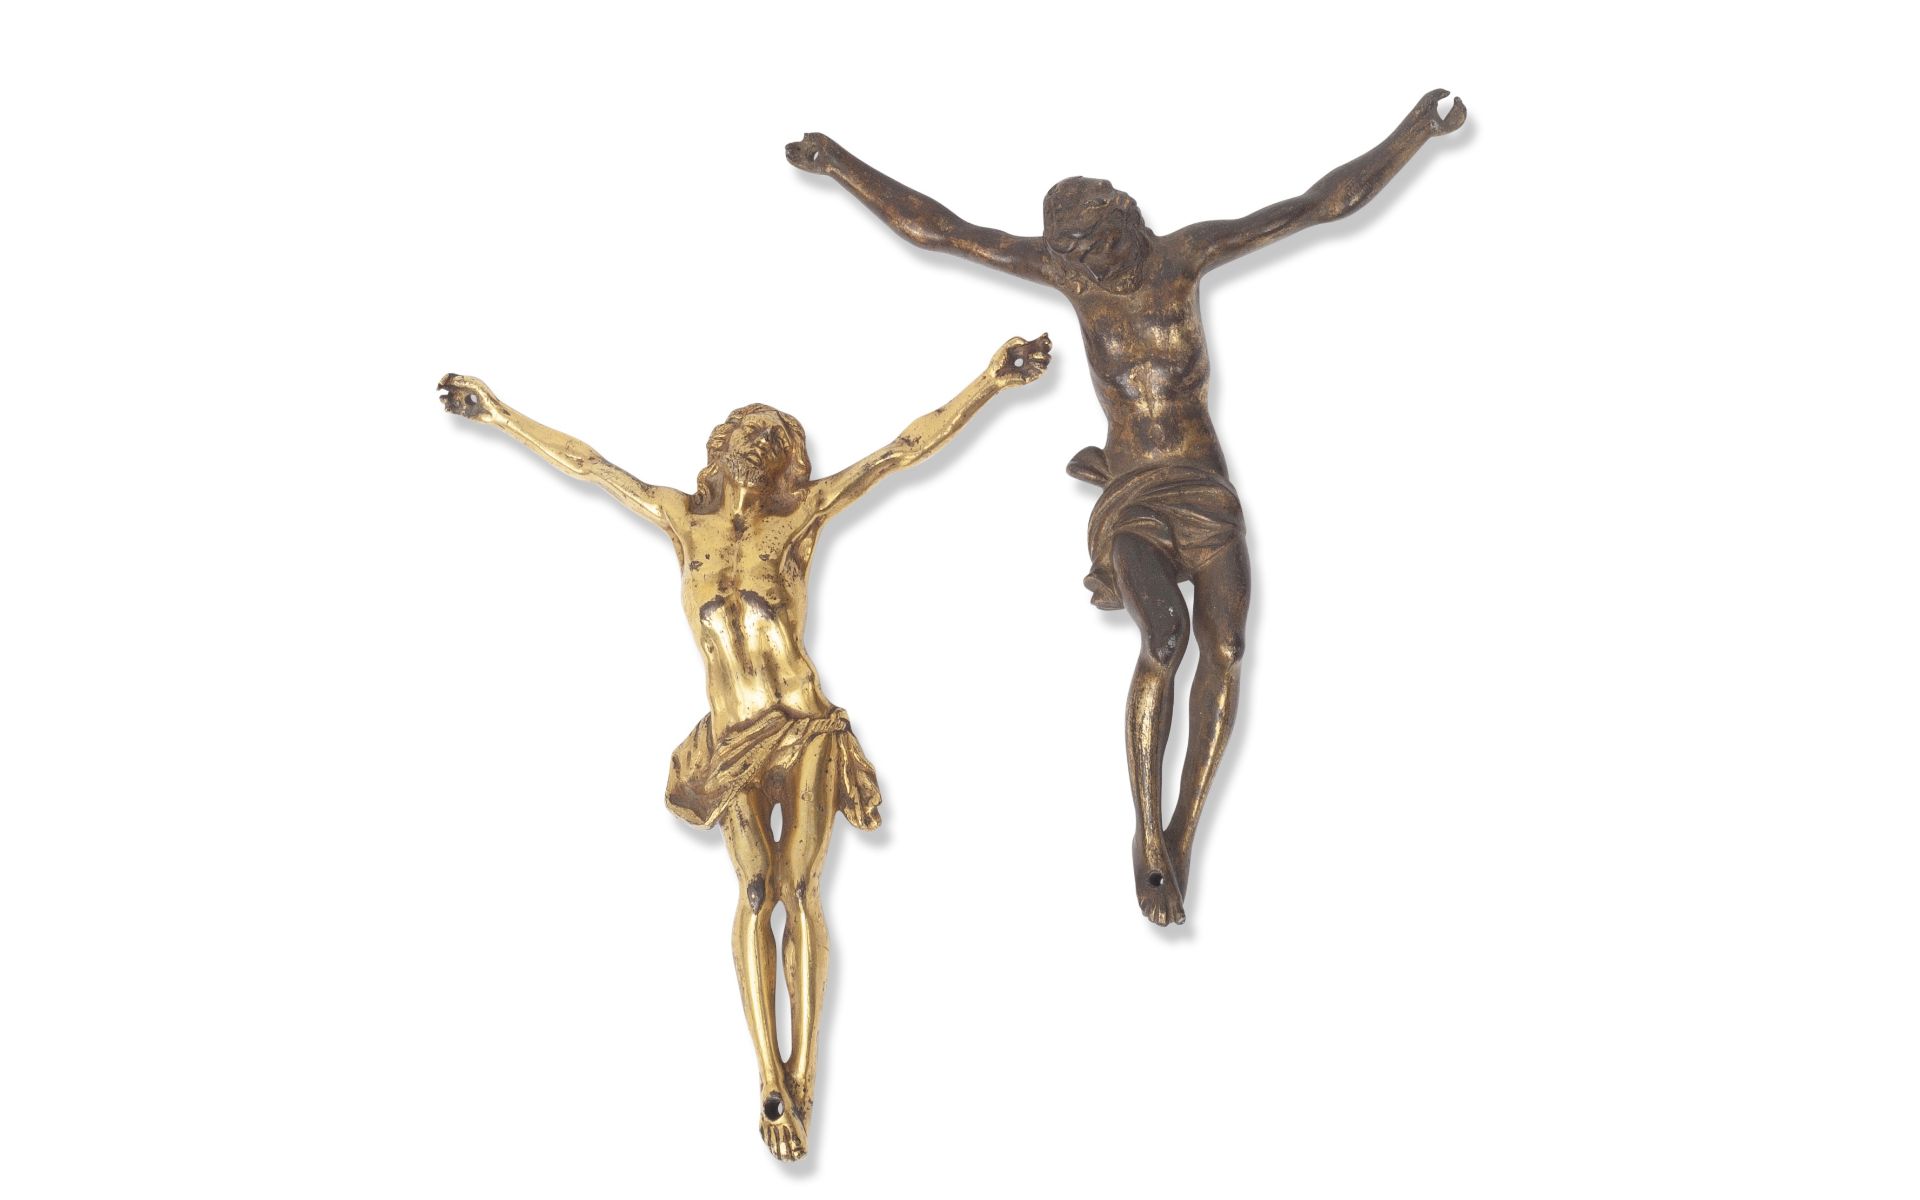 A 16TH / 17TH CENTURY NORTH EUROPEAN GILT BRONZE CORPUS CHRISTI TOGETHER WITH ANOTHER